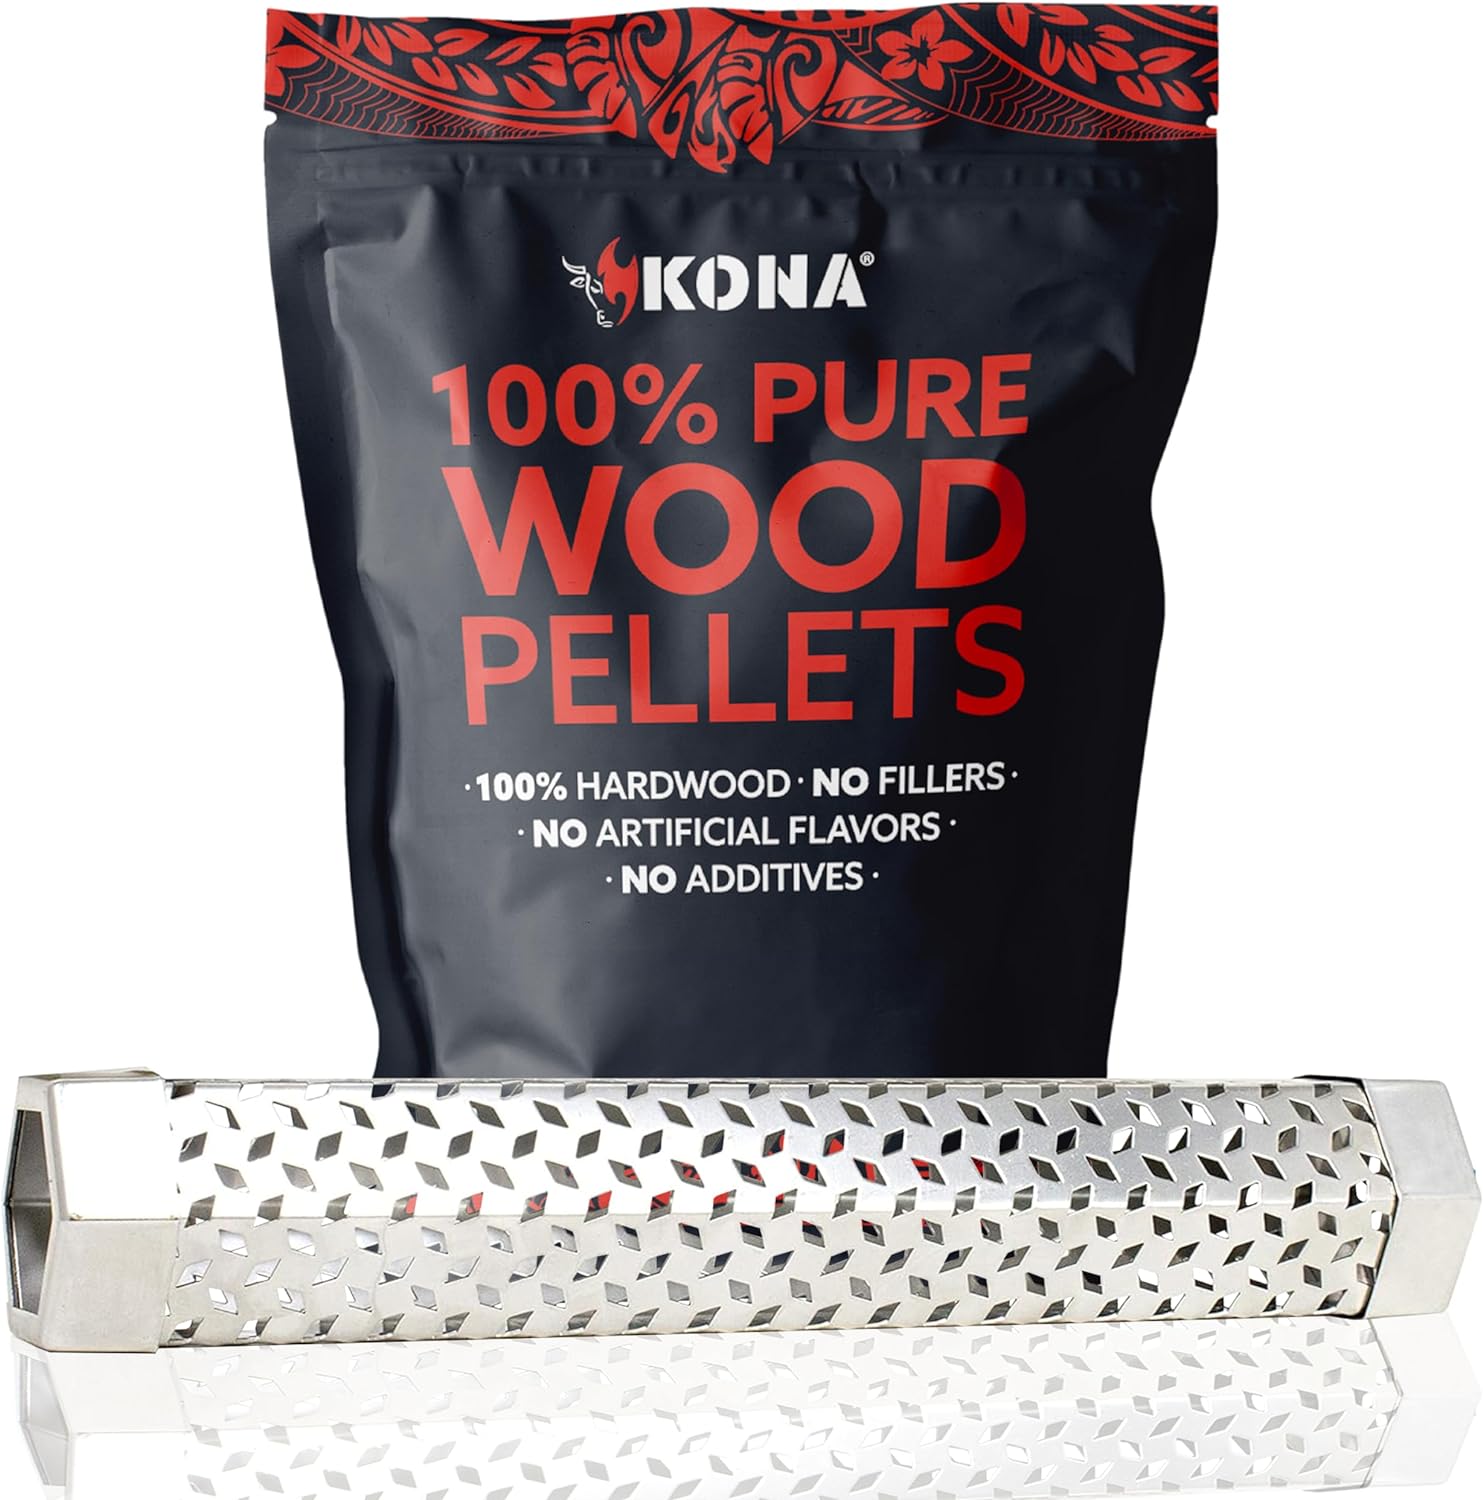 Kona Wood Smoker Tube & Smoking Pellets Set - Hot & Cold Smoke for Charcoal, Electric, Gas & All BBQ Grills - Stainless Steel 12 Inch Hexagon & 14 ounces of Premium Blend Hardwood